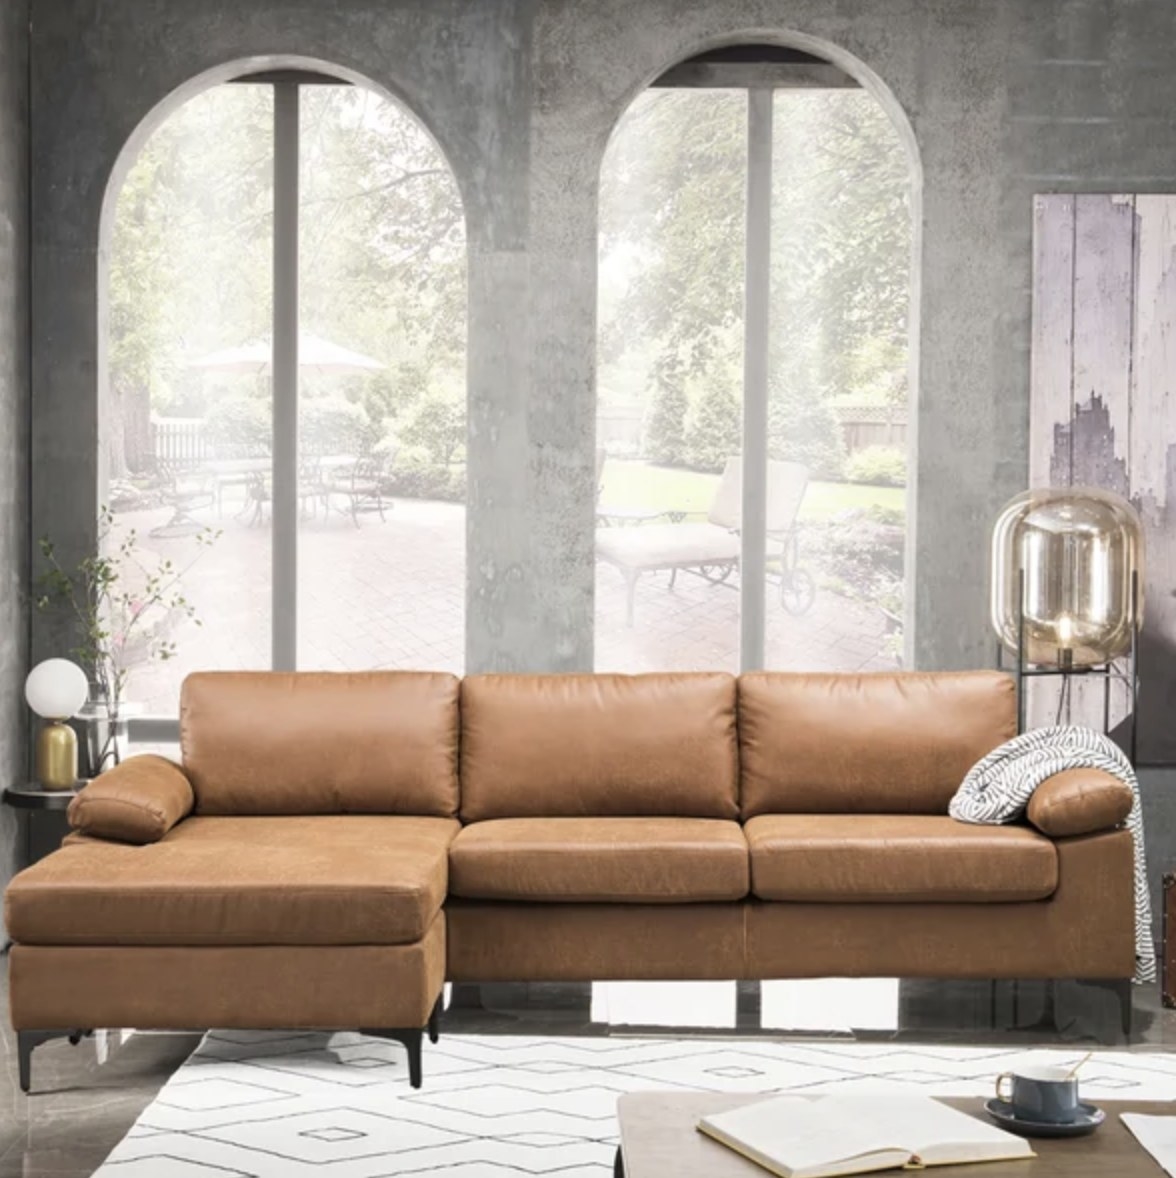 The light brown leather couch has two regular seating areas and a long chaise spot